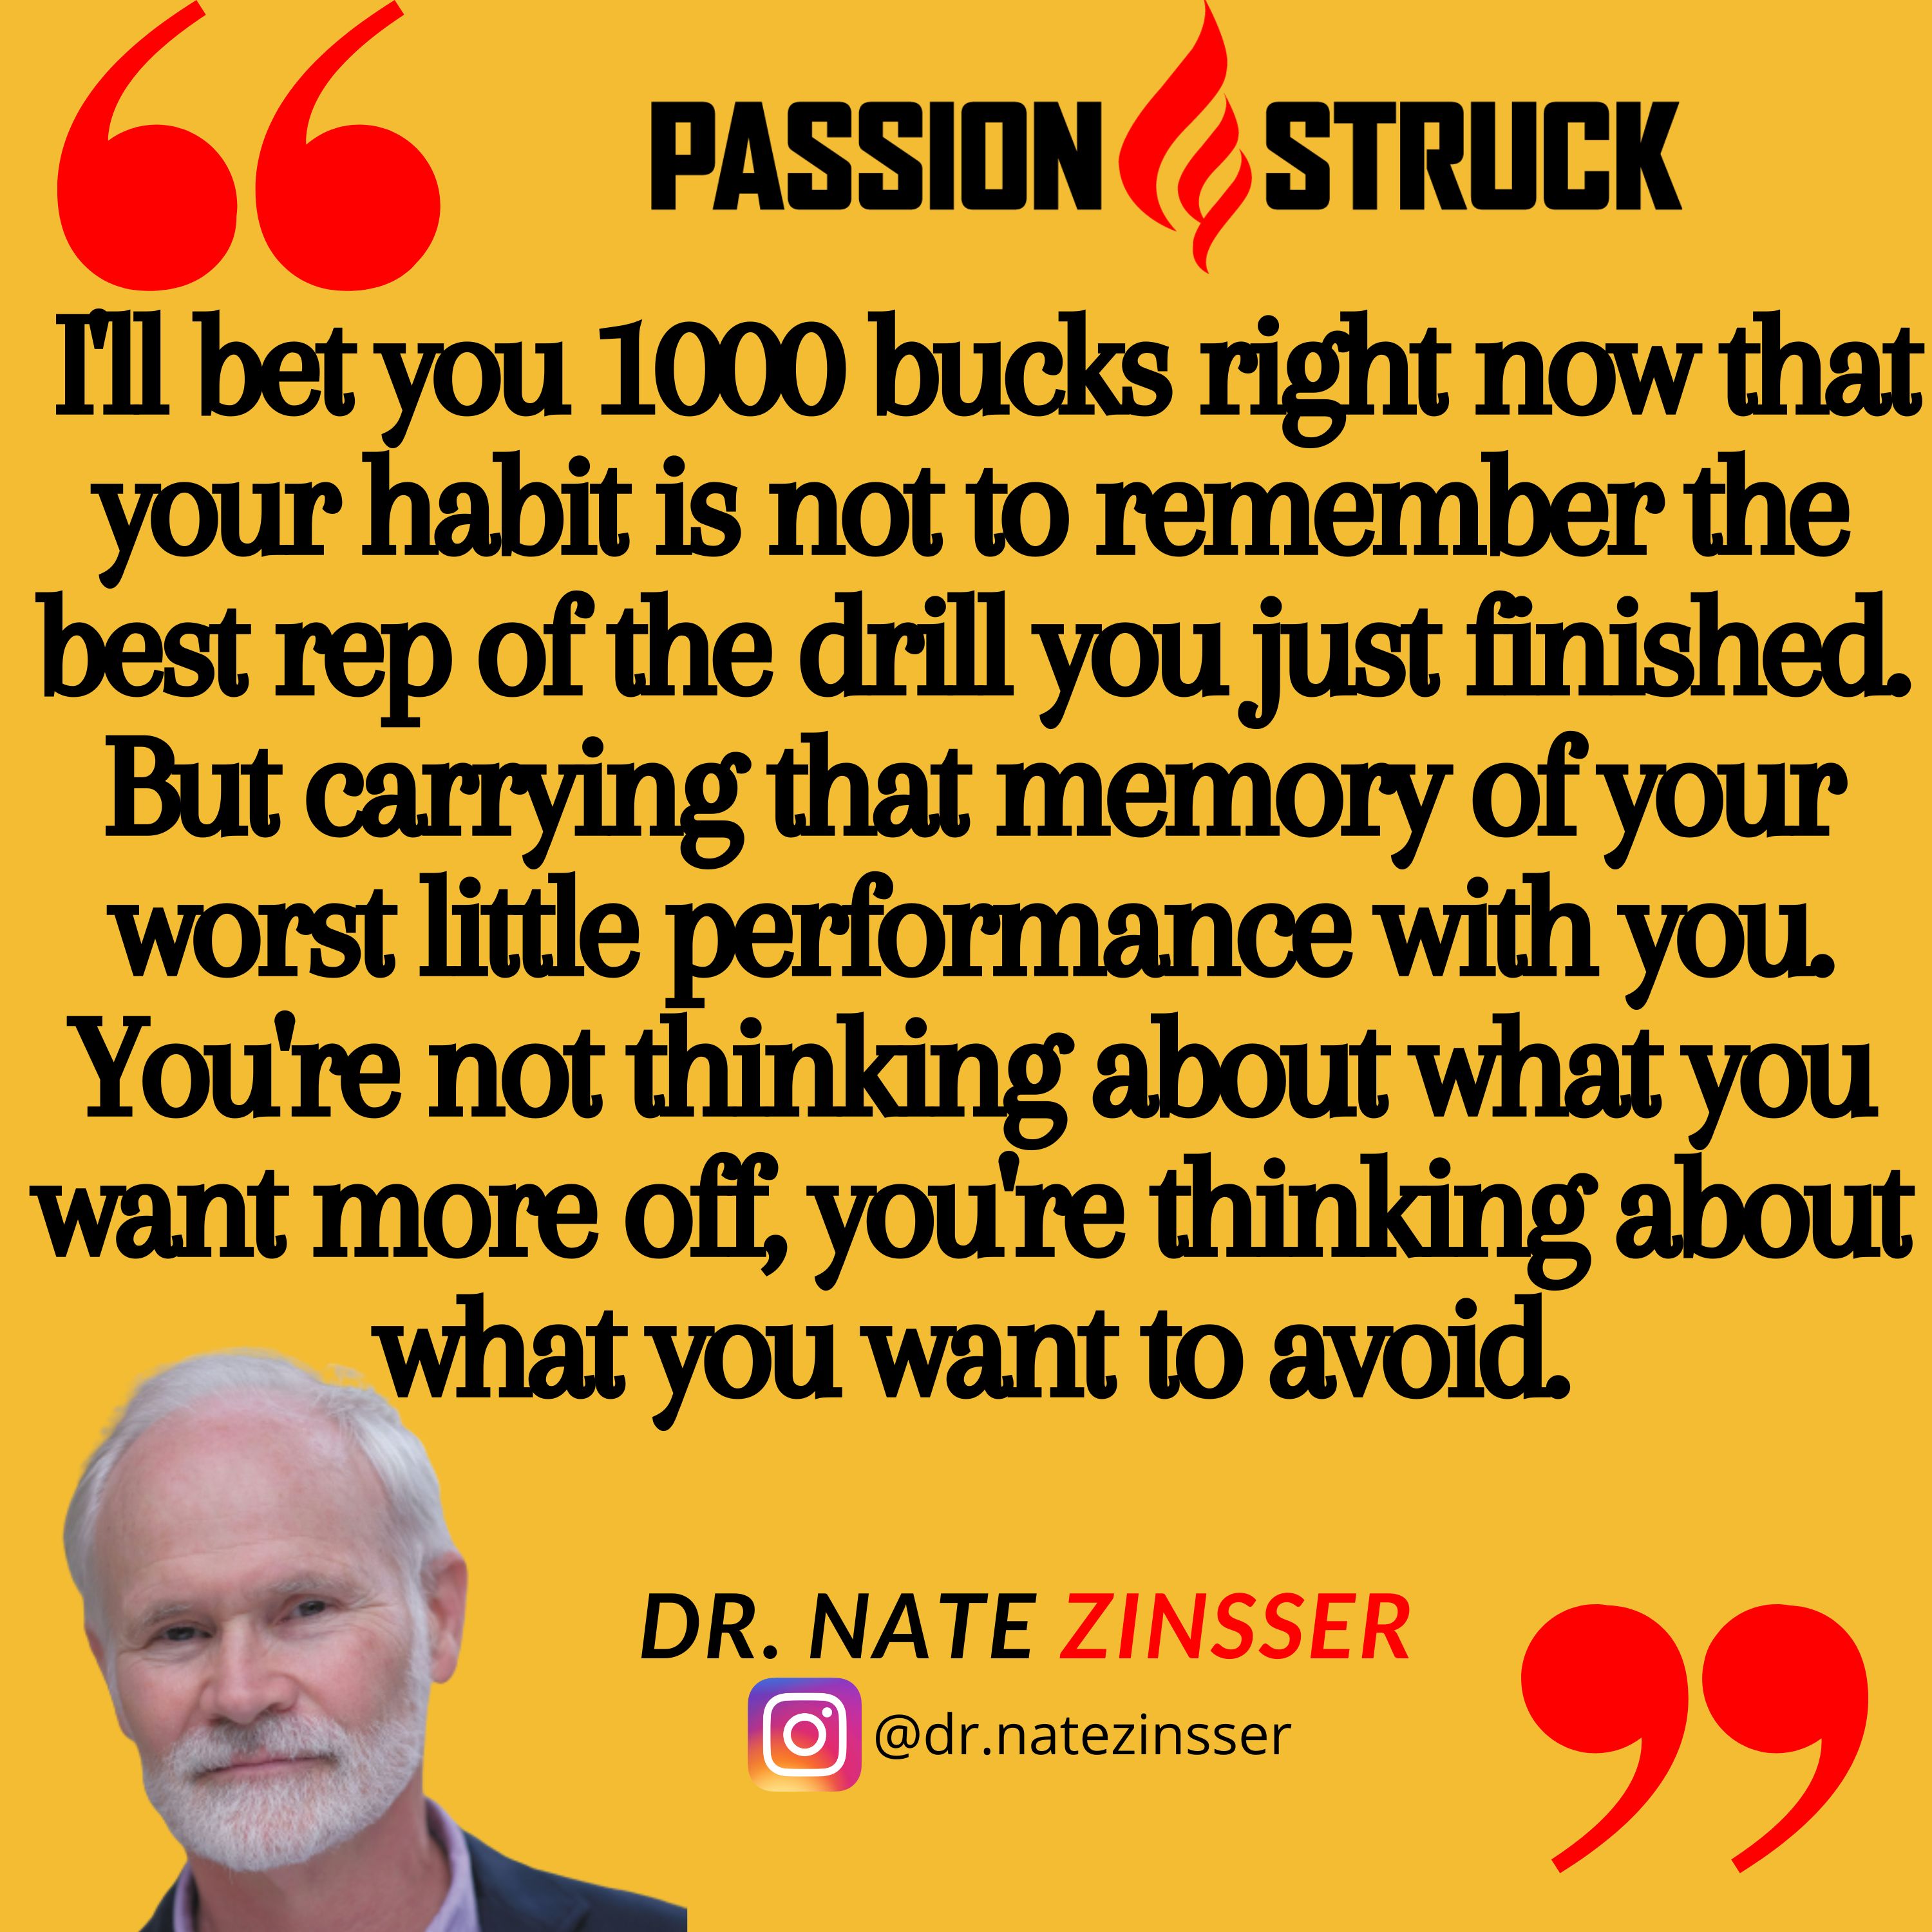 Quote by Dr. Nate Zinsser on the Passion Struck podcast: I'll bet you 1000 bucks right now that your habit is not to remember the best rep of the drill you just finished. But carrying that memory of your worst little performance with you. You're not thinking about what you want more off, you're thinking about what you want to avoid.